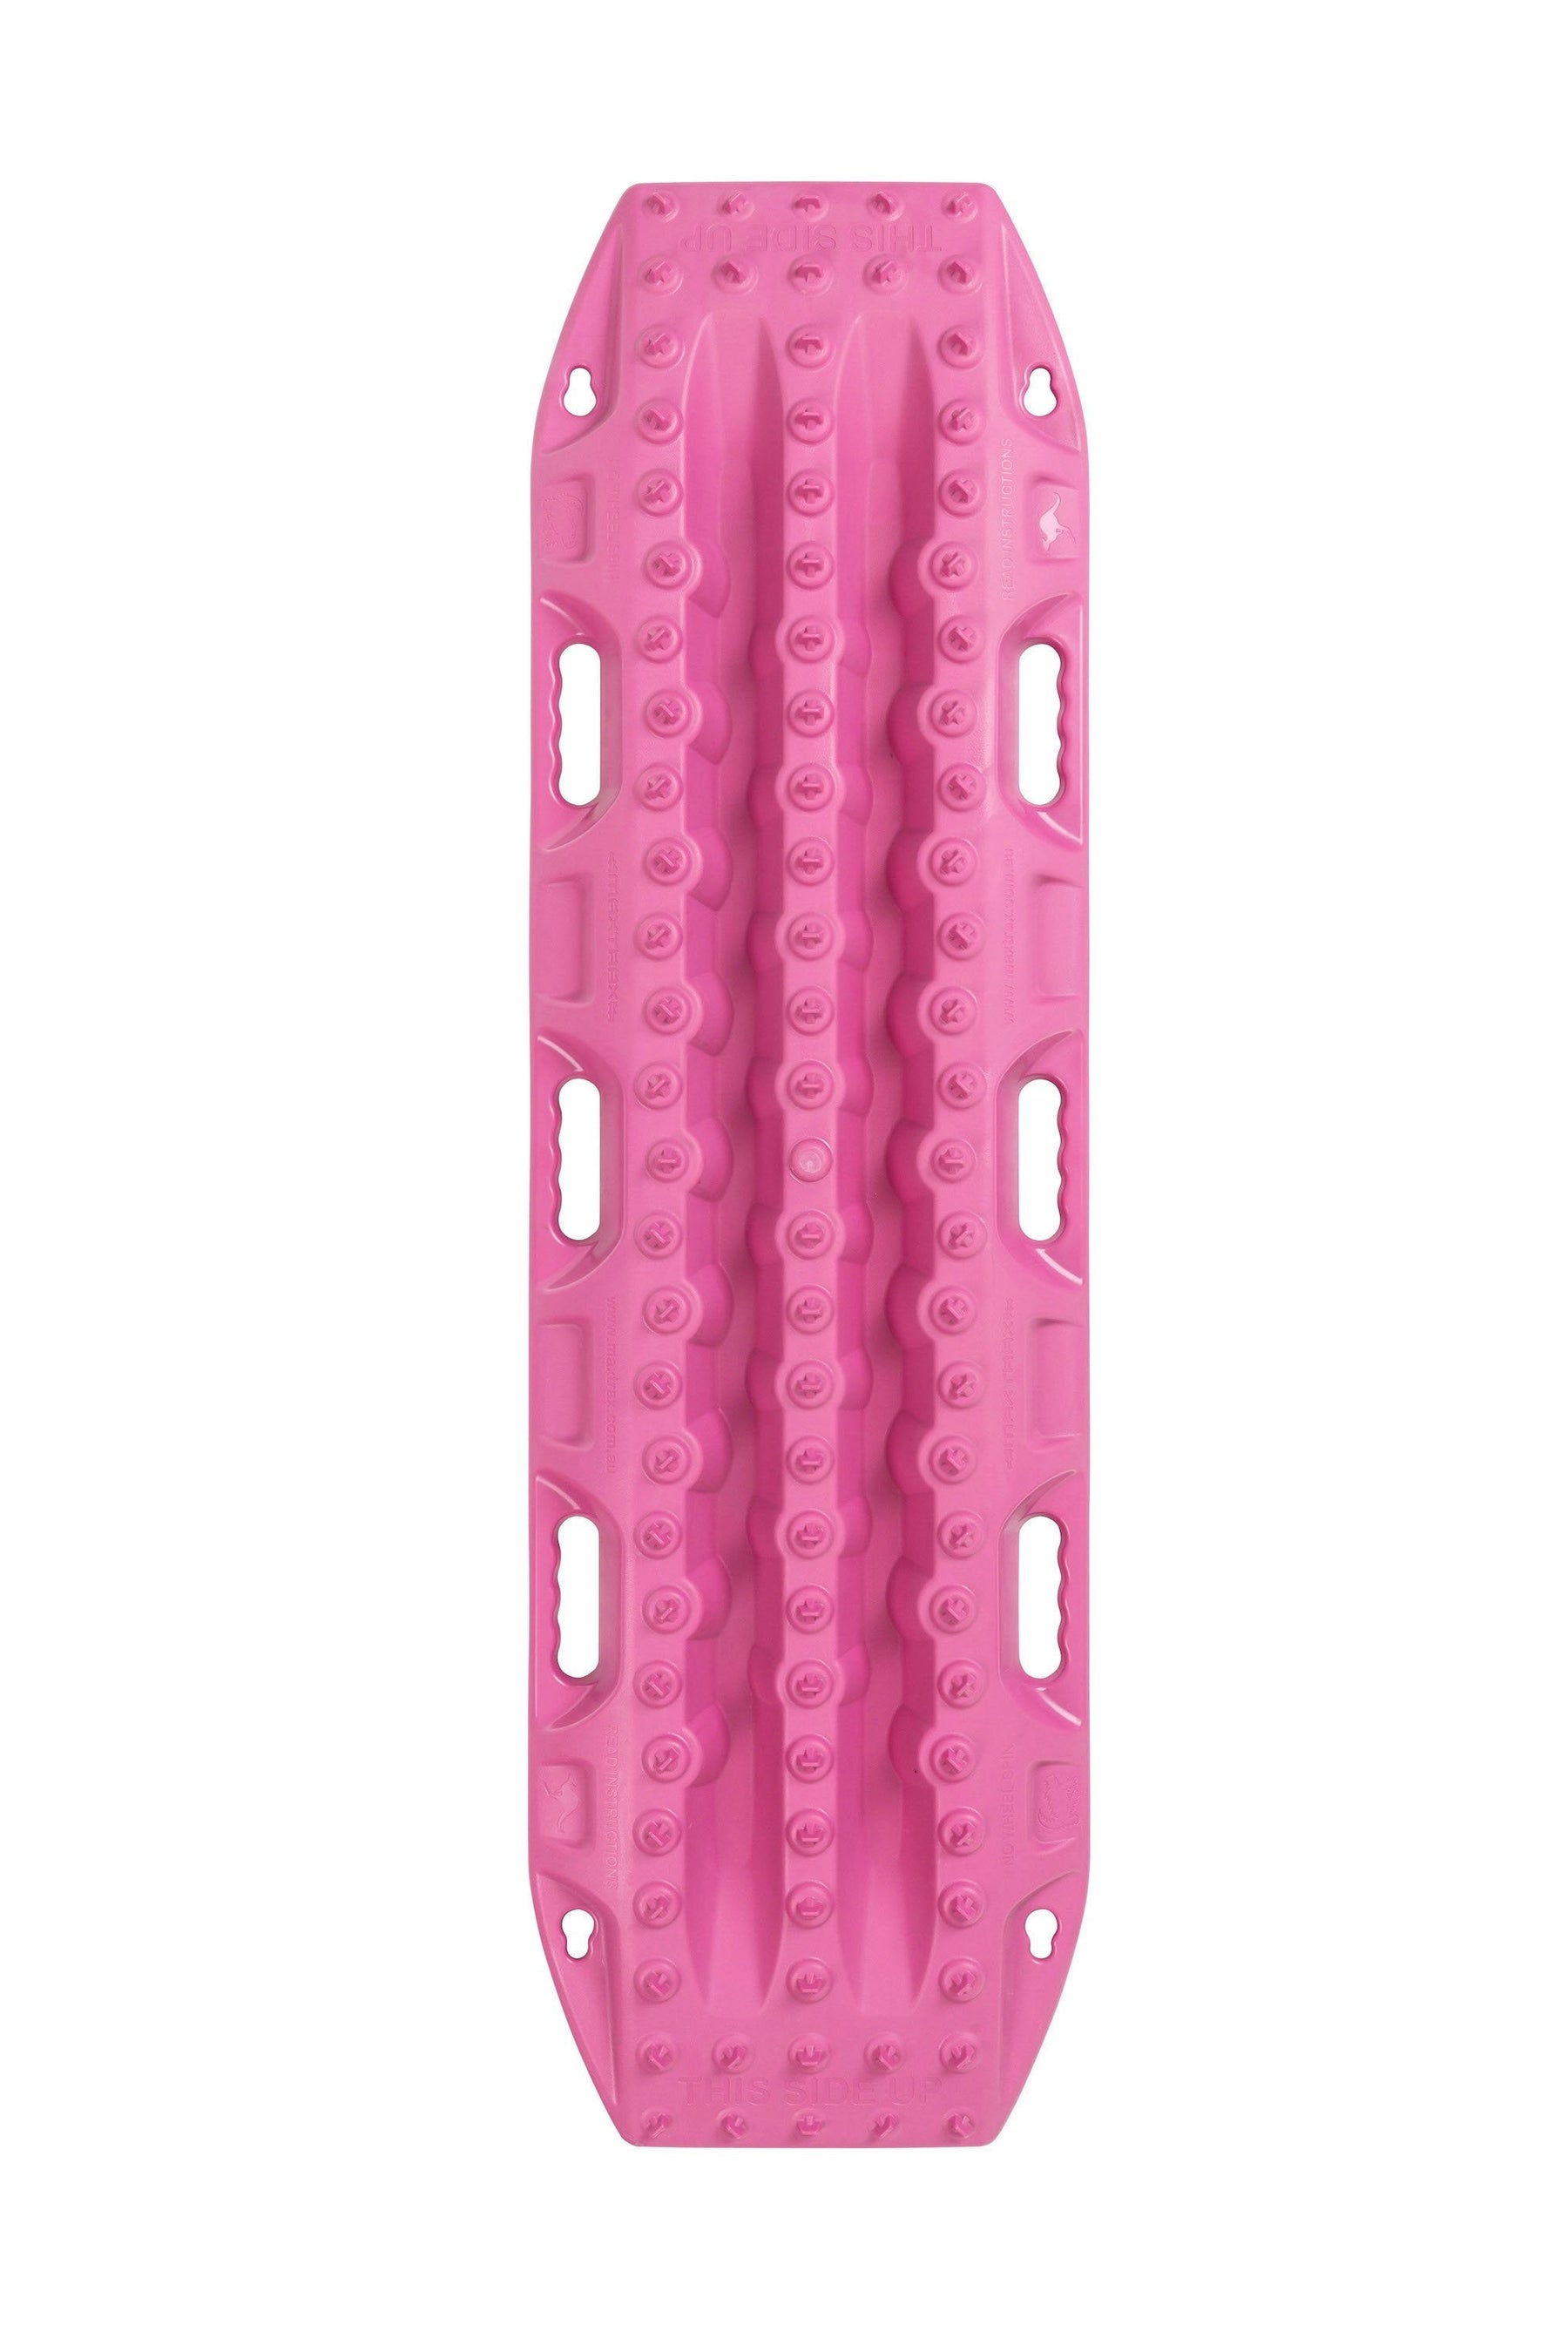 MAXTRAX MKII Pink Recovery Boards  Recovery Gear MAXTRAX- Adventure Imports